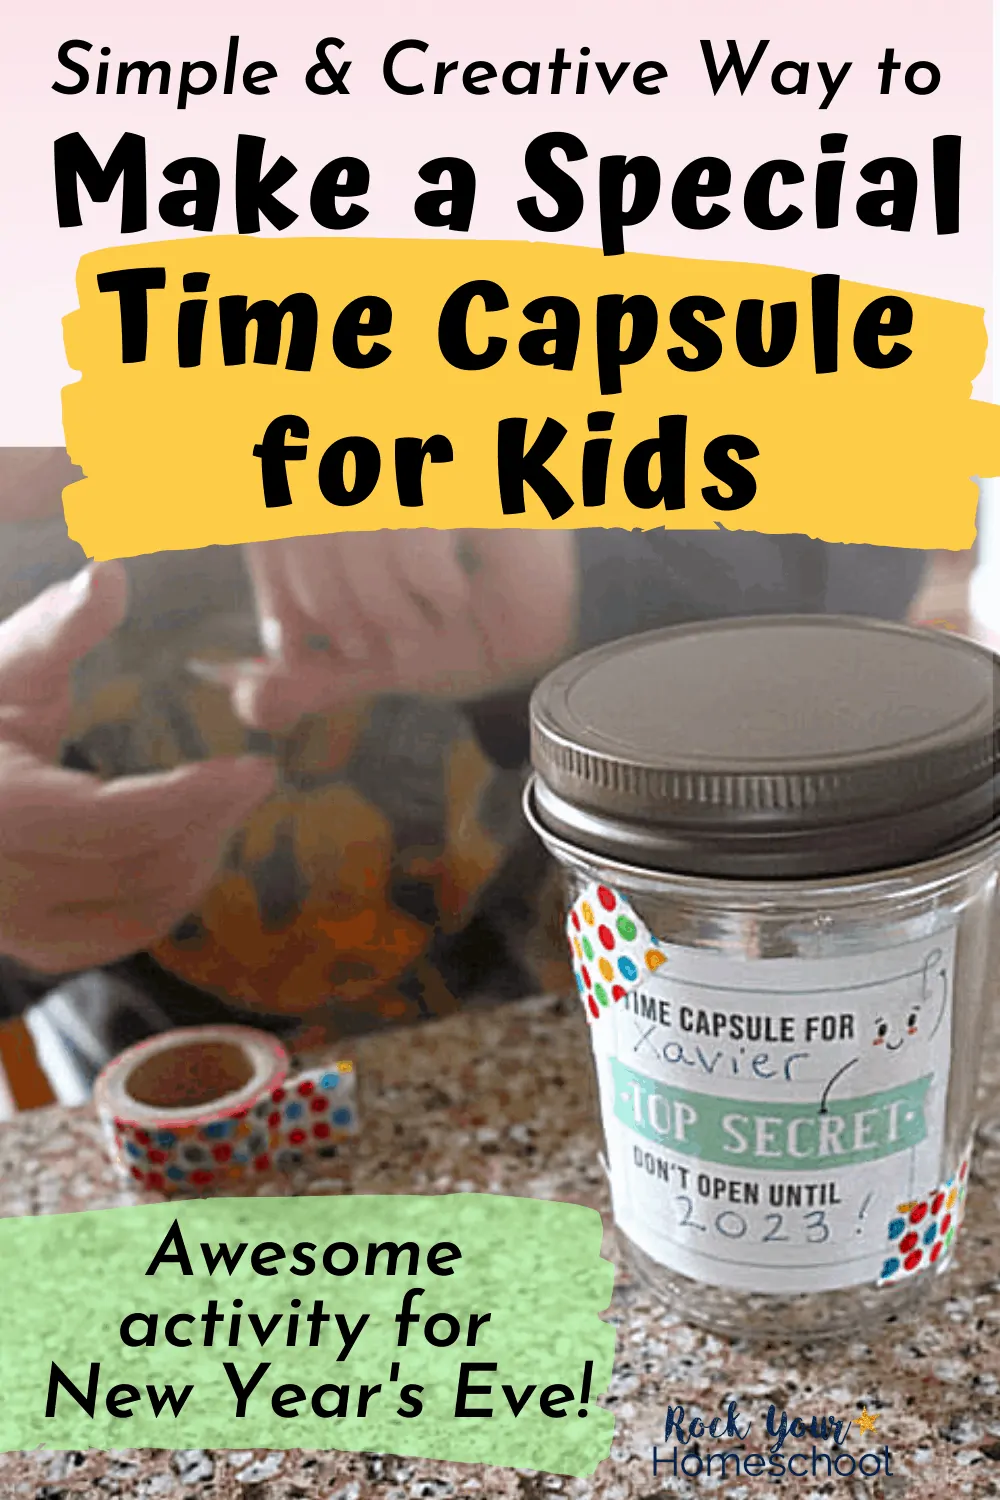 Simple & Creative Way to Make a Special Time Capsule for Kids